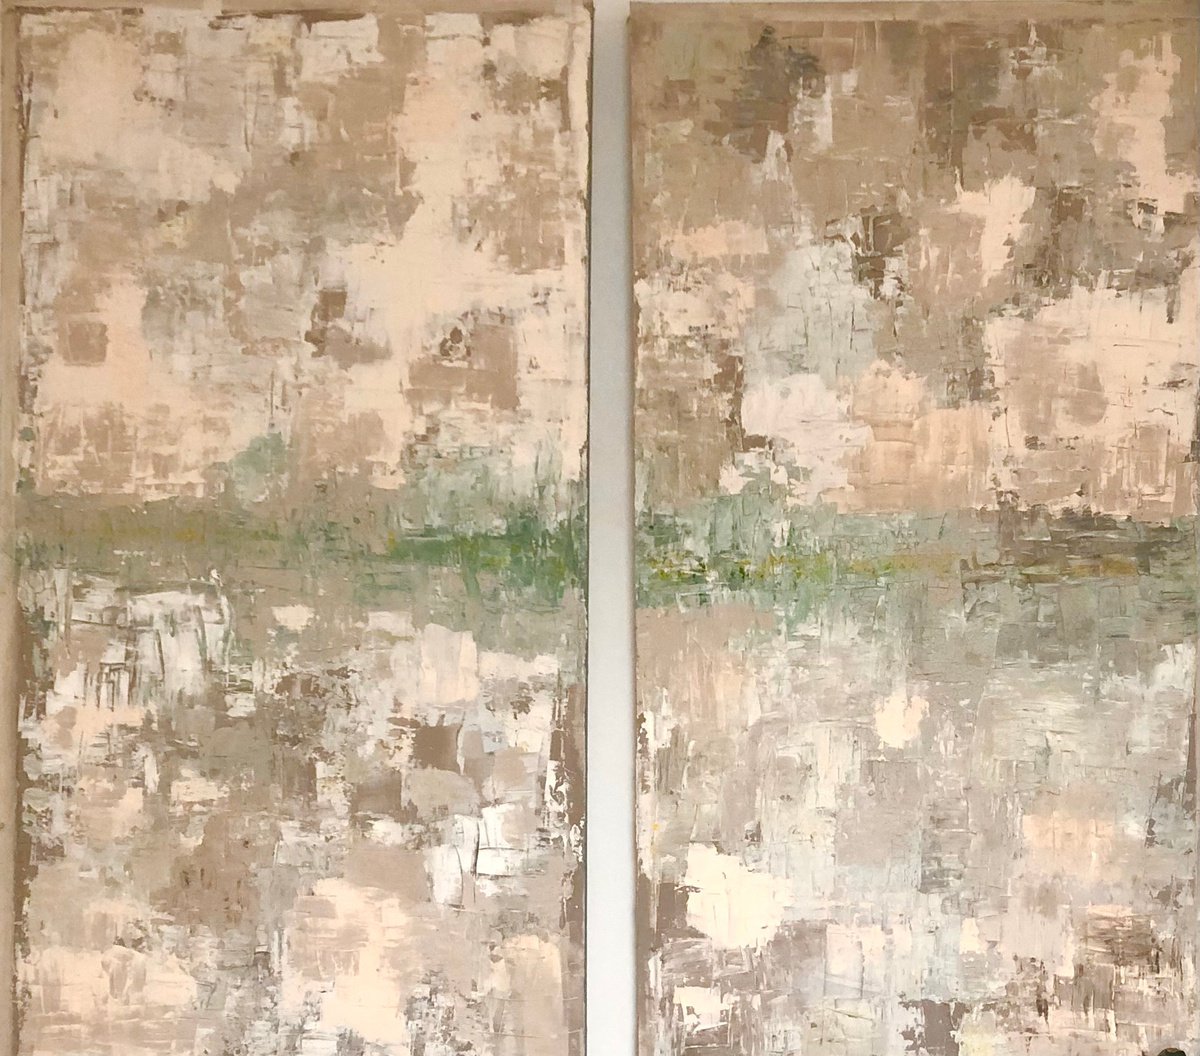 Title: INTROPIA (Diptych) by Berta Giner